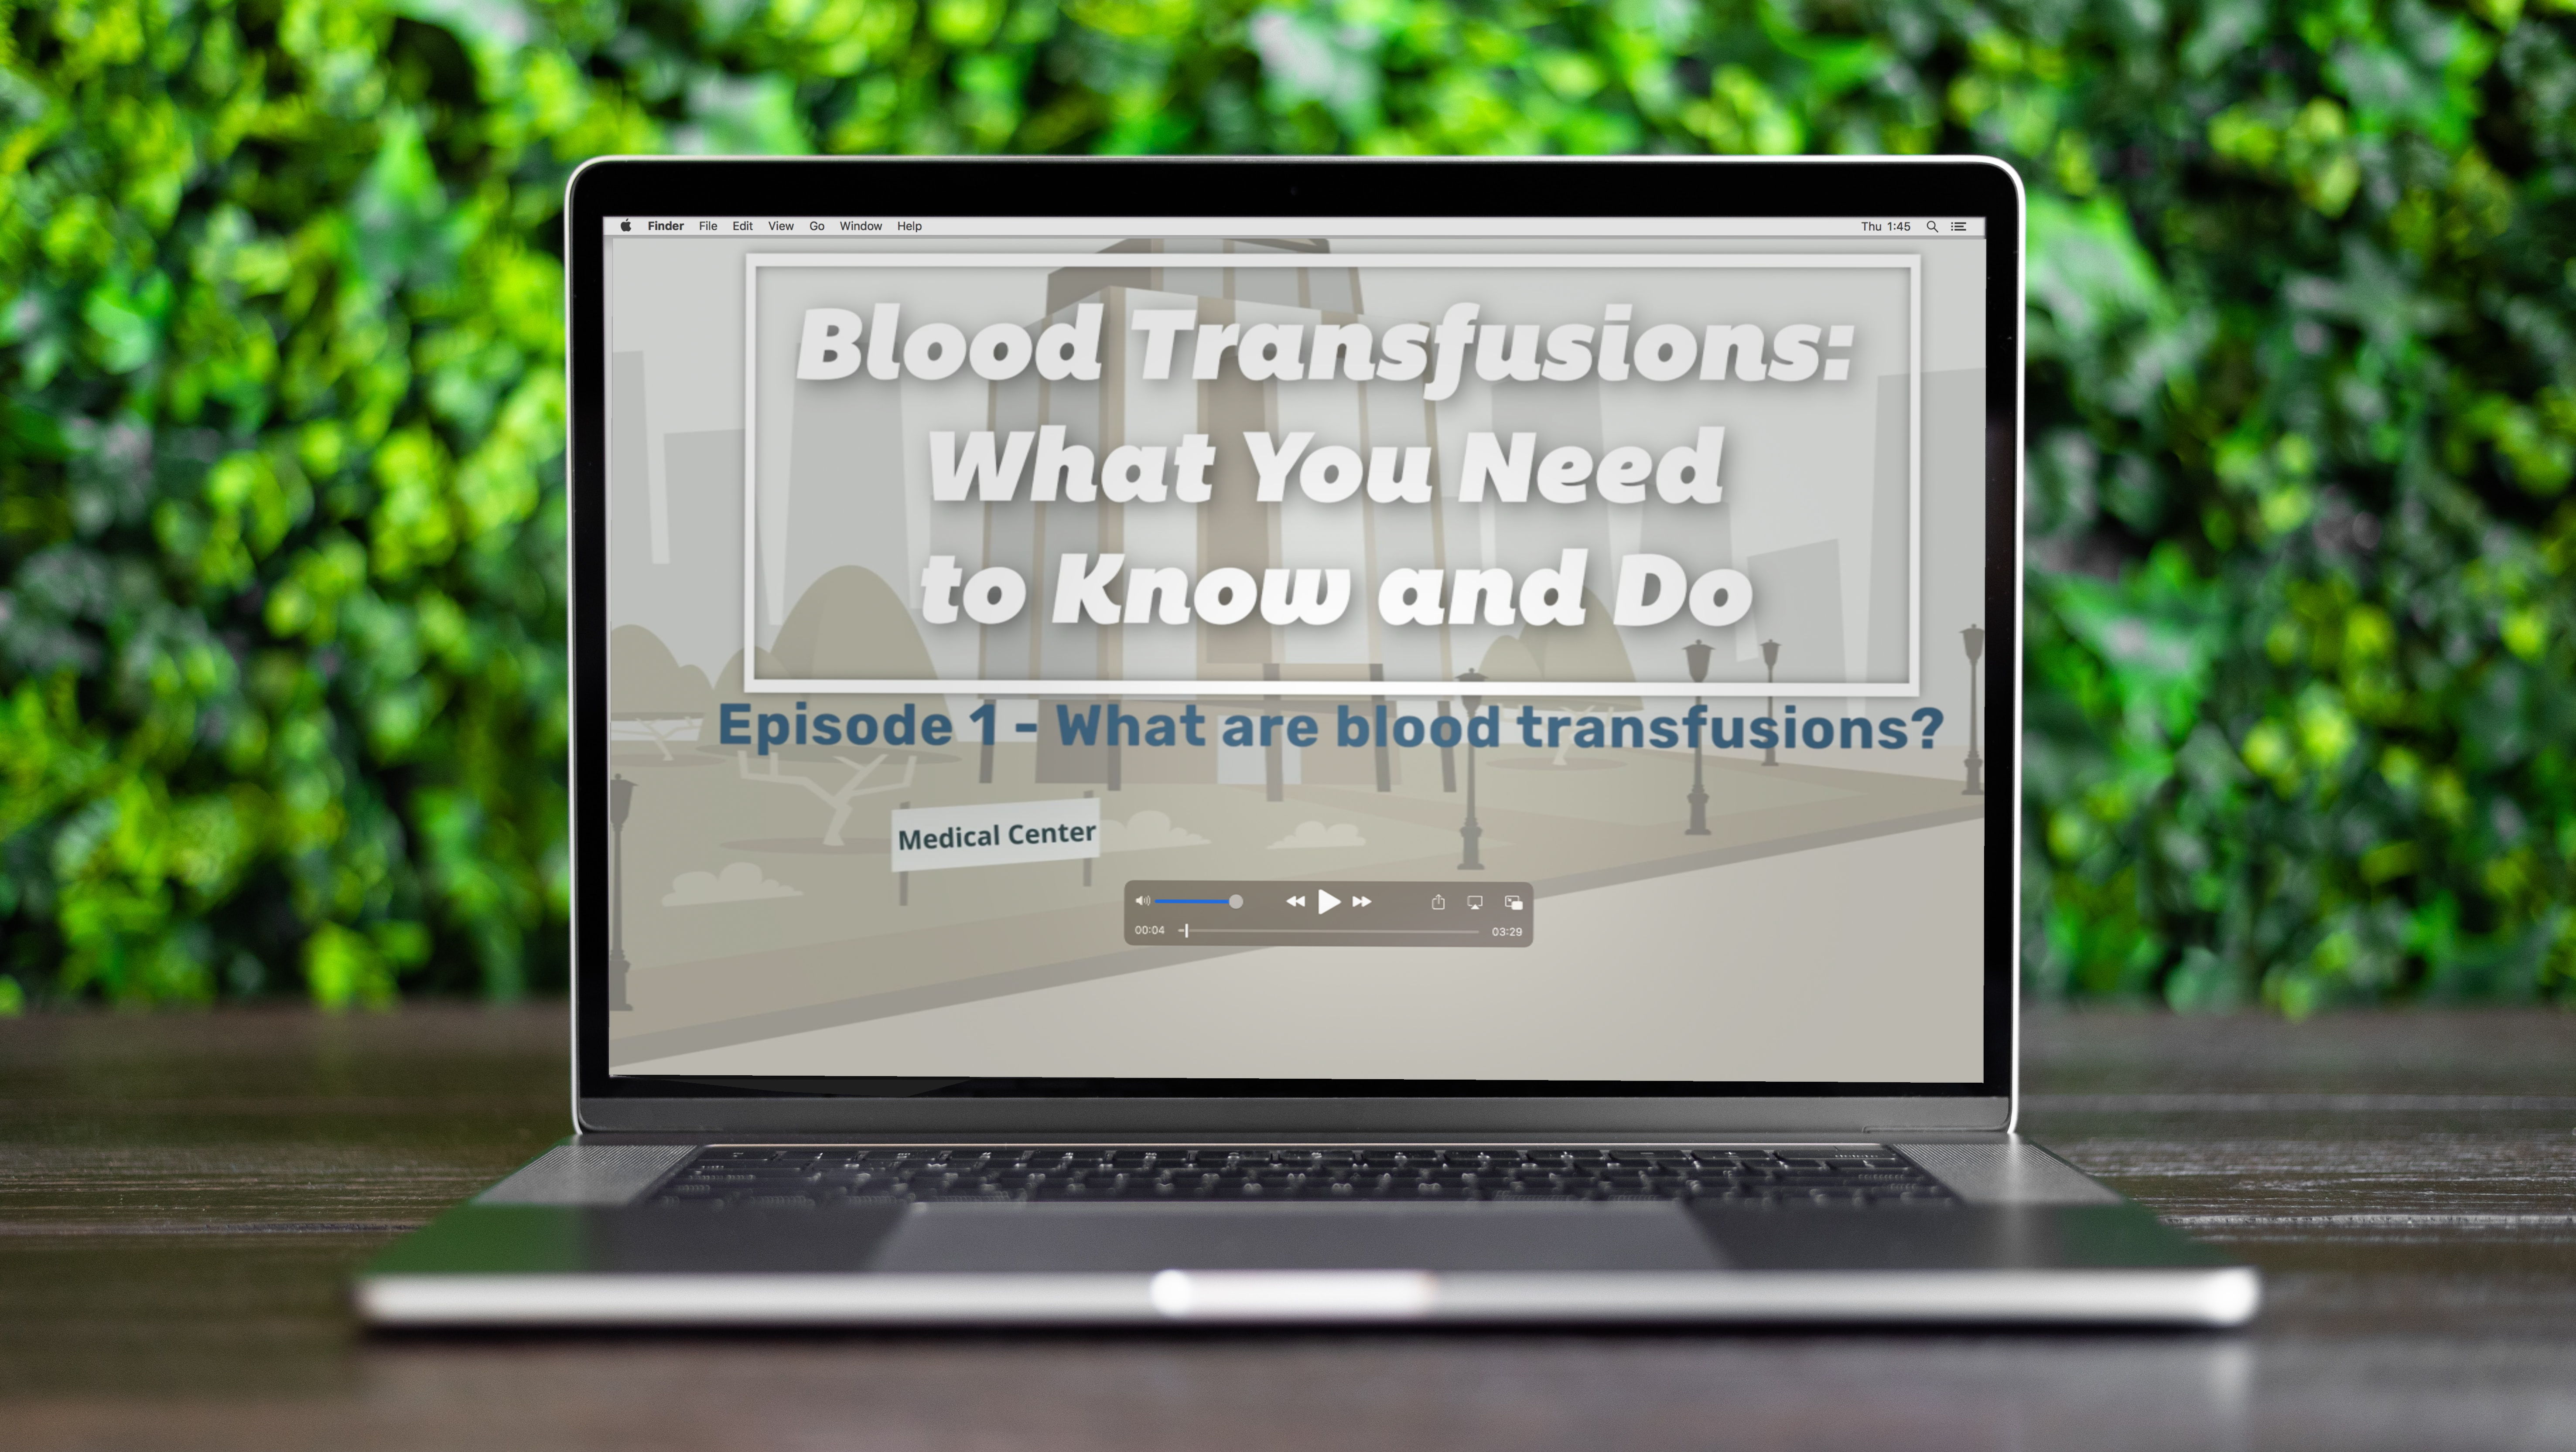 Blood Transfusions: What You Need to Know and Do